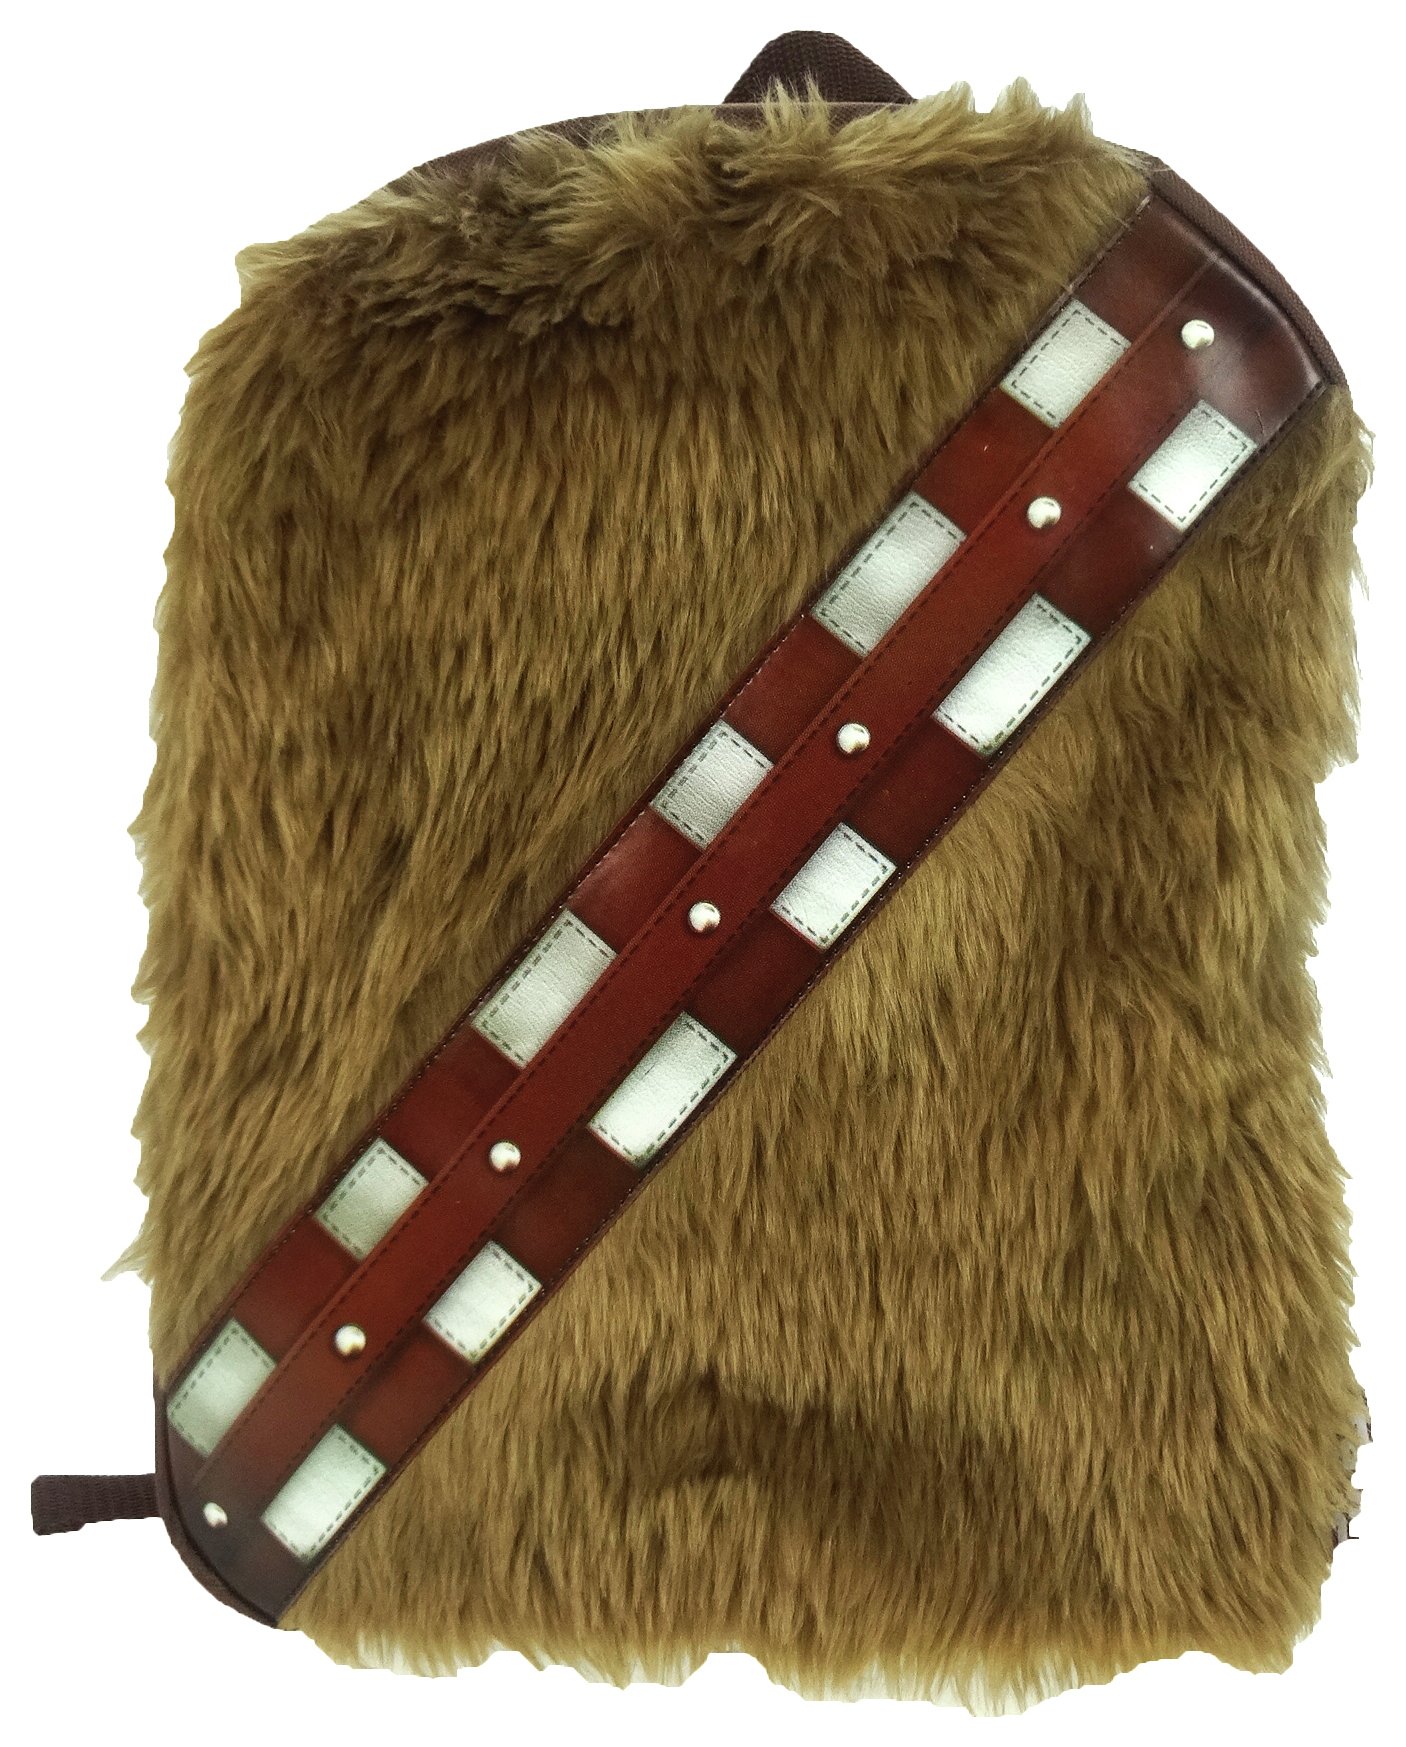 Star Wars Novelty Backpack - Chewie